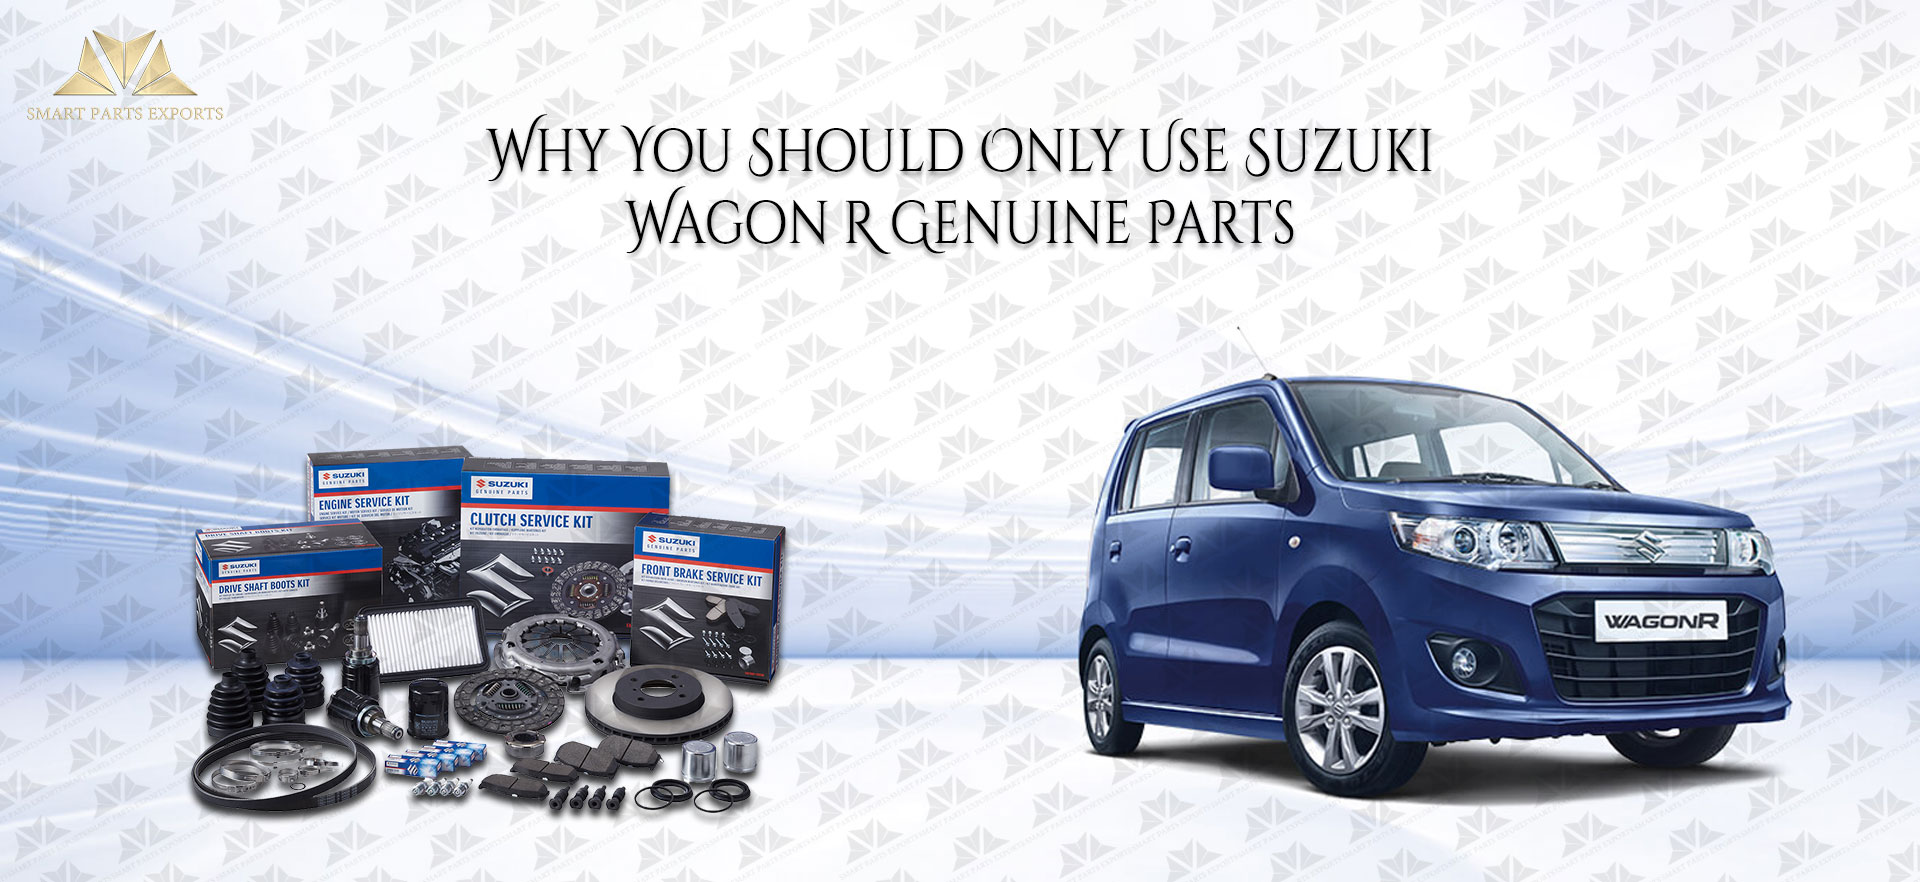 Why You Should Only Use Suzuki Wagon R Genuine Parts